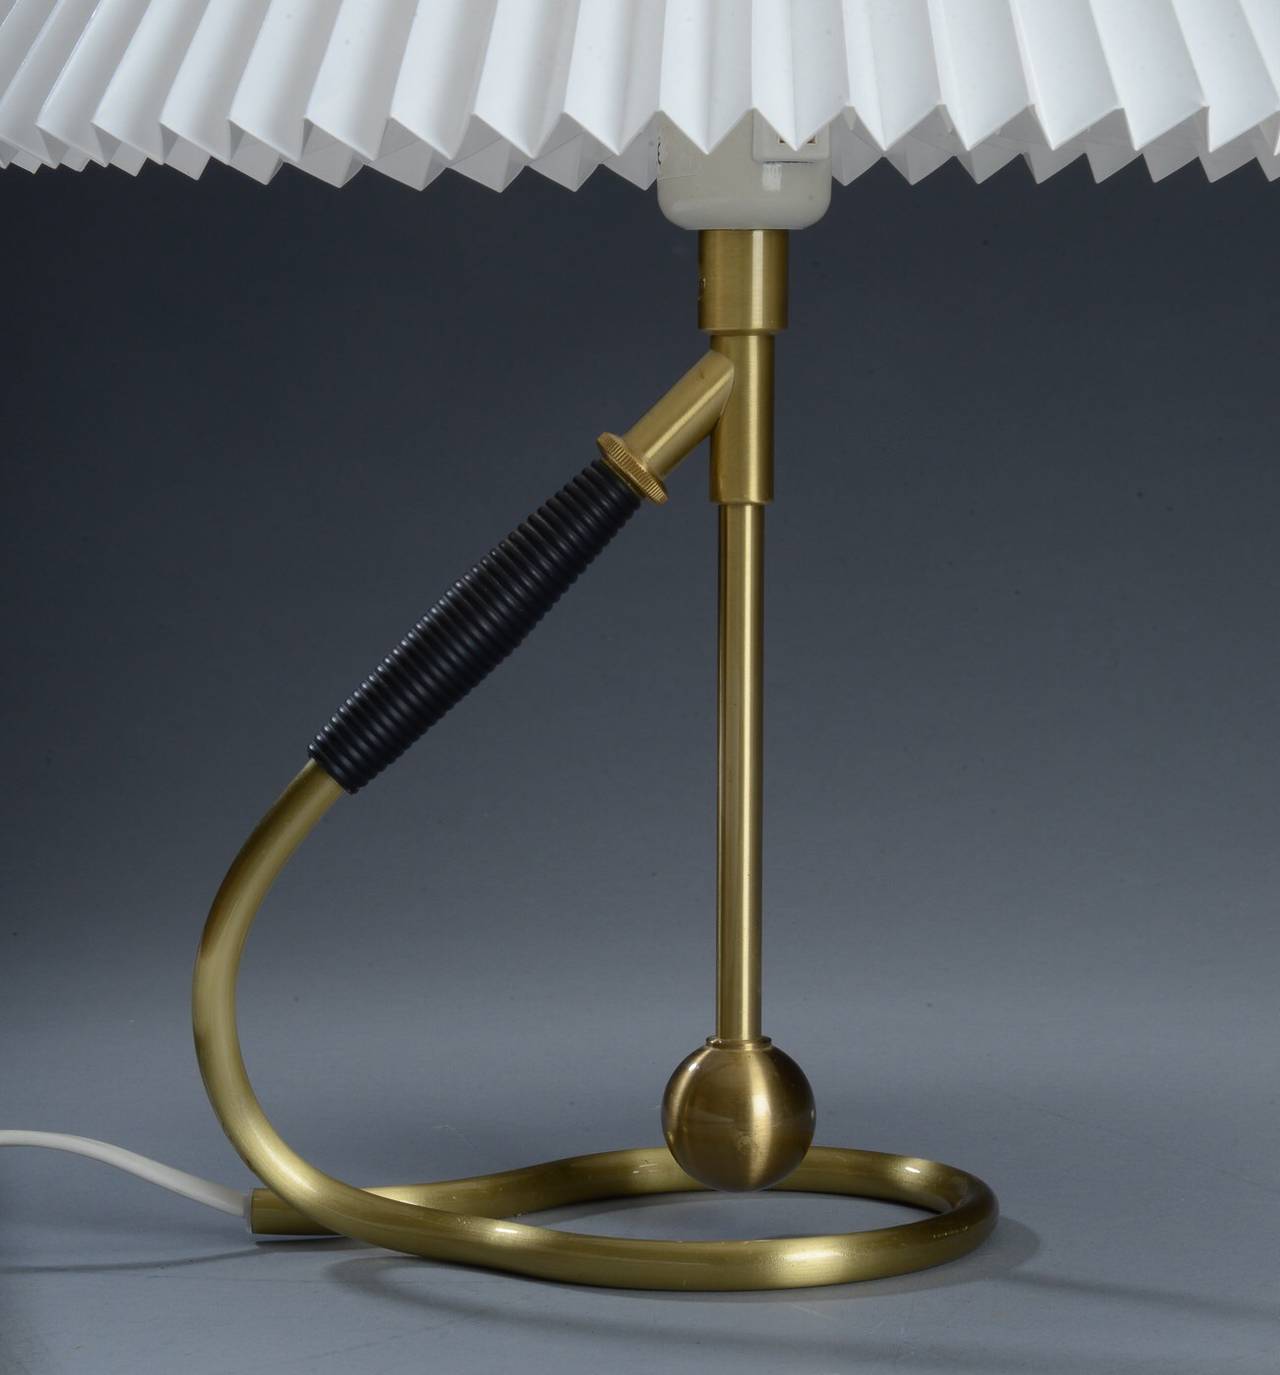 Elegant Table or Wall Lamp by Kaare Klint model 306  in fully original condition with original Le Klint shade.
Circa 1940